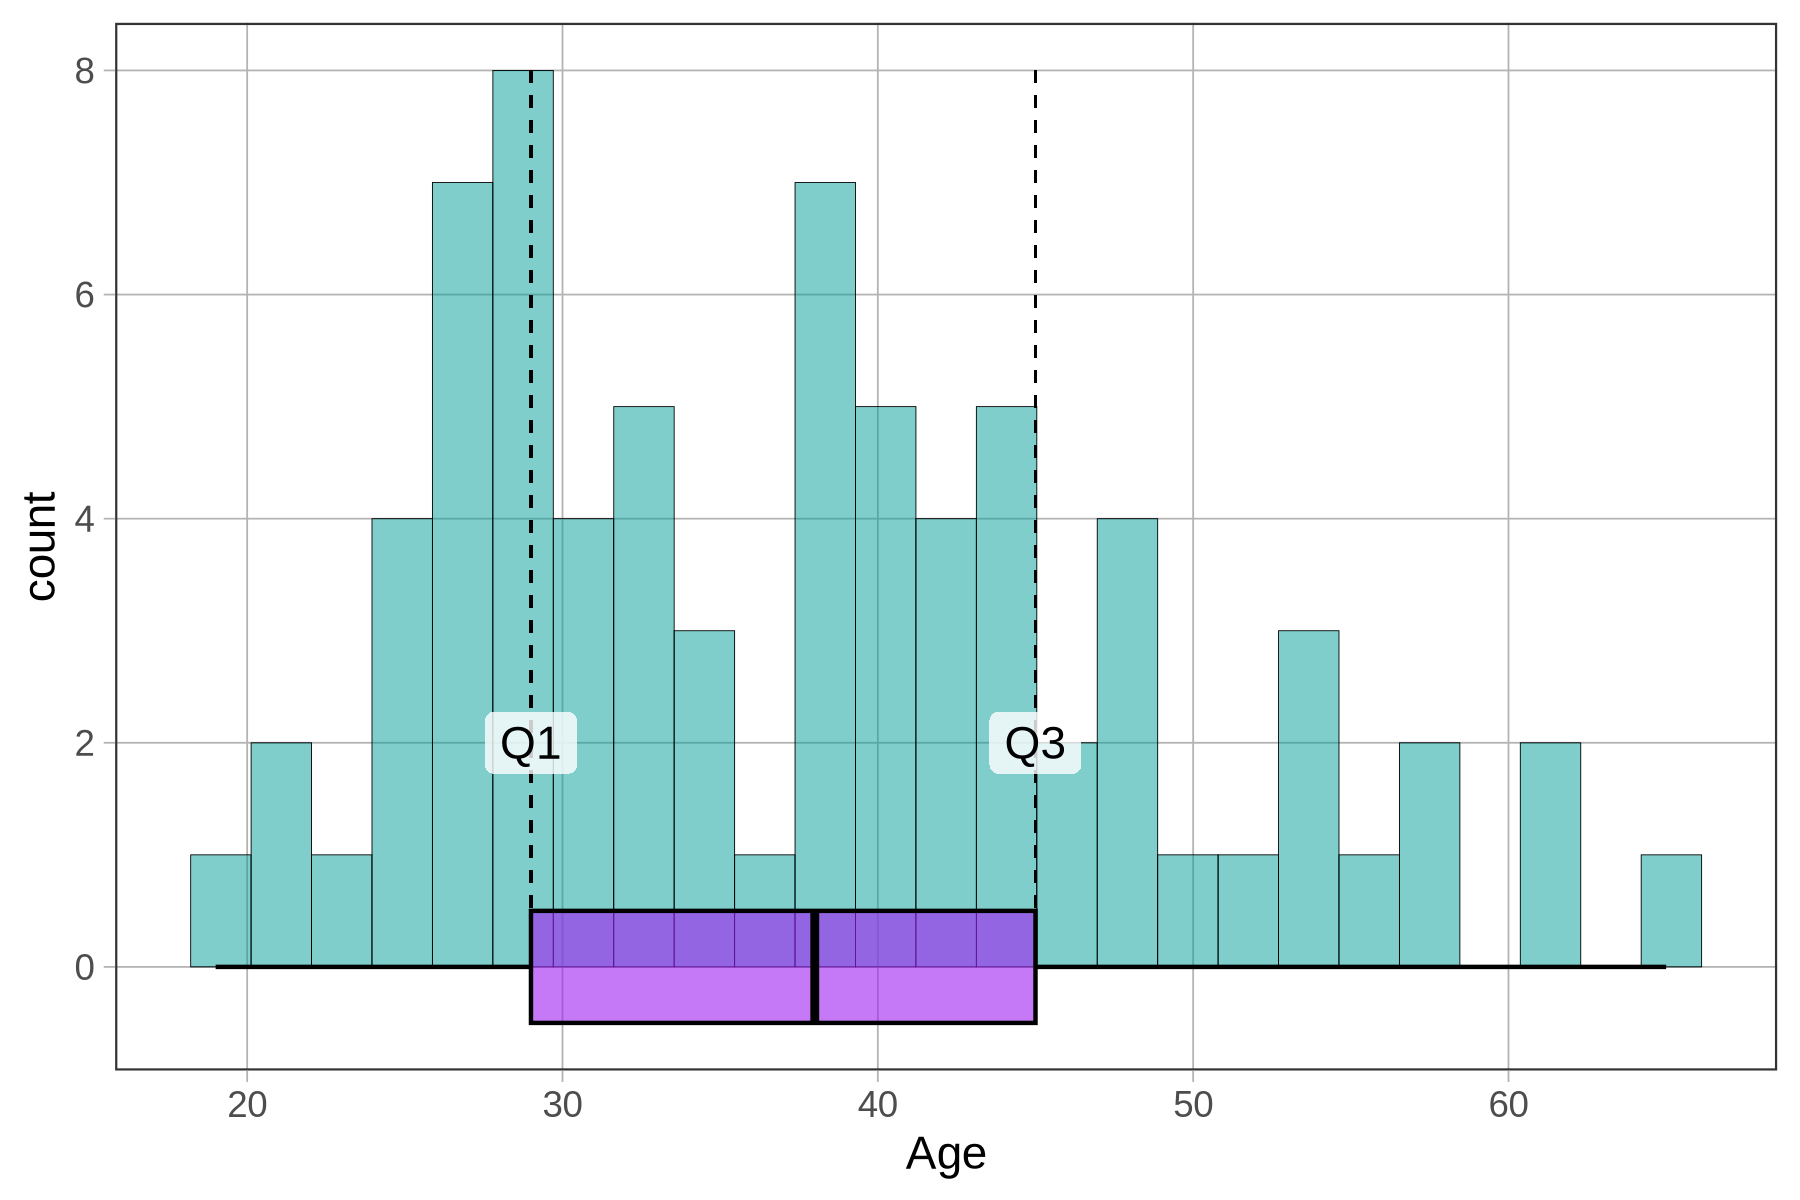 A histogram of Age overlaid with a boxplot, but this time there are two vertical lines corresponding to Q1 and Q3.